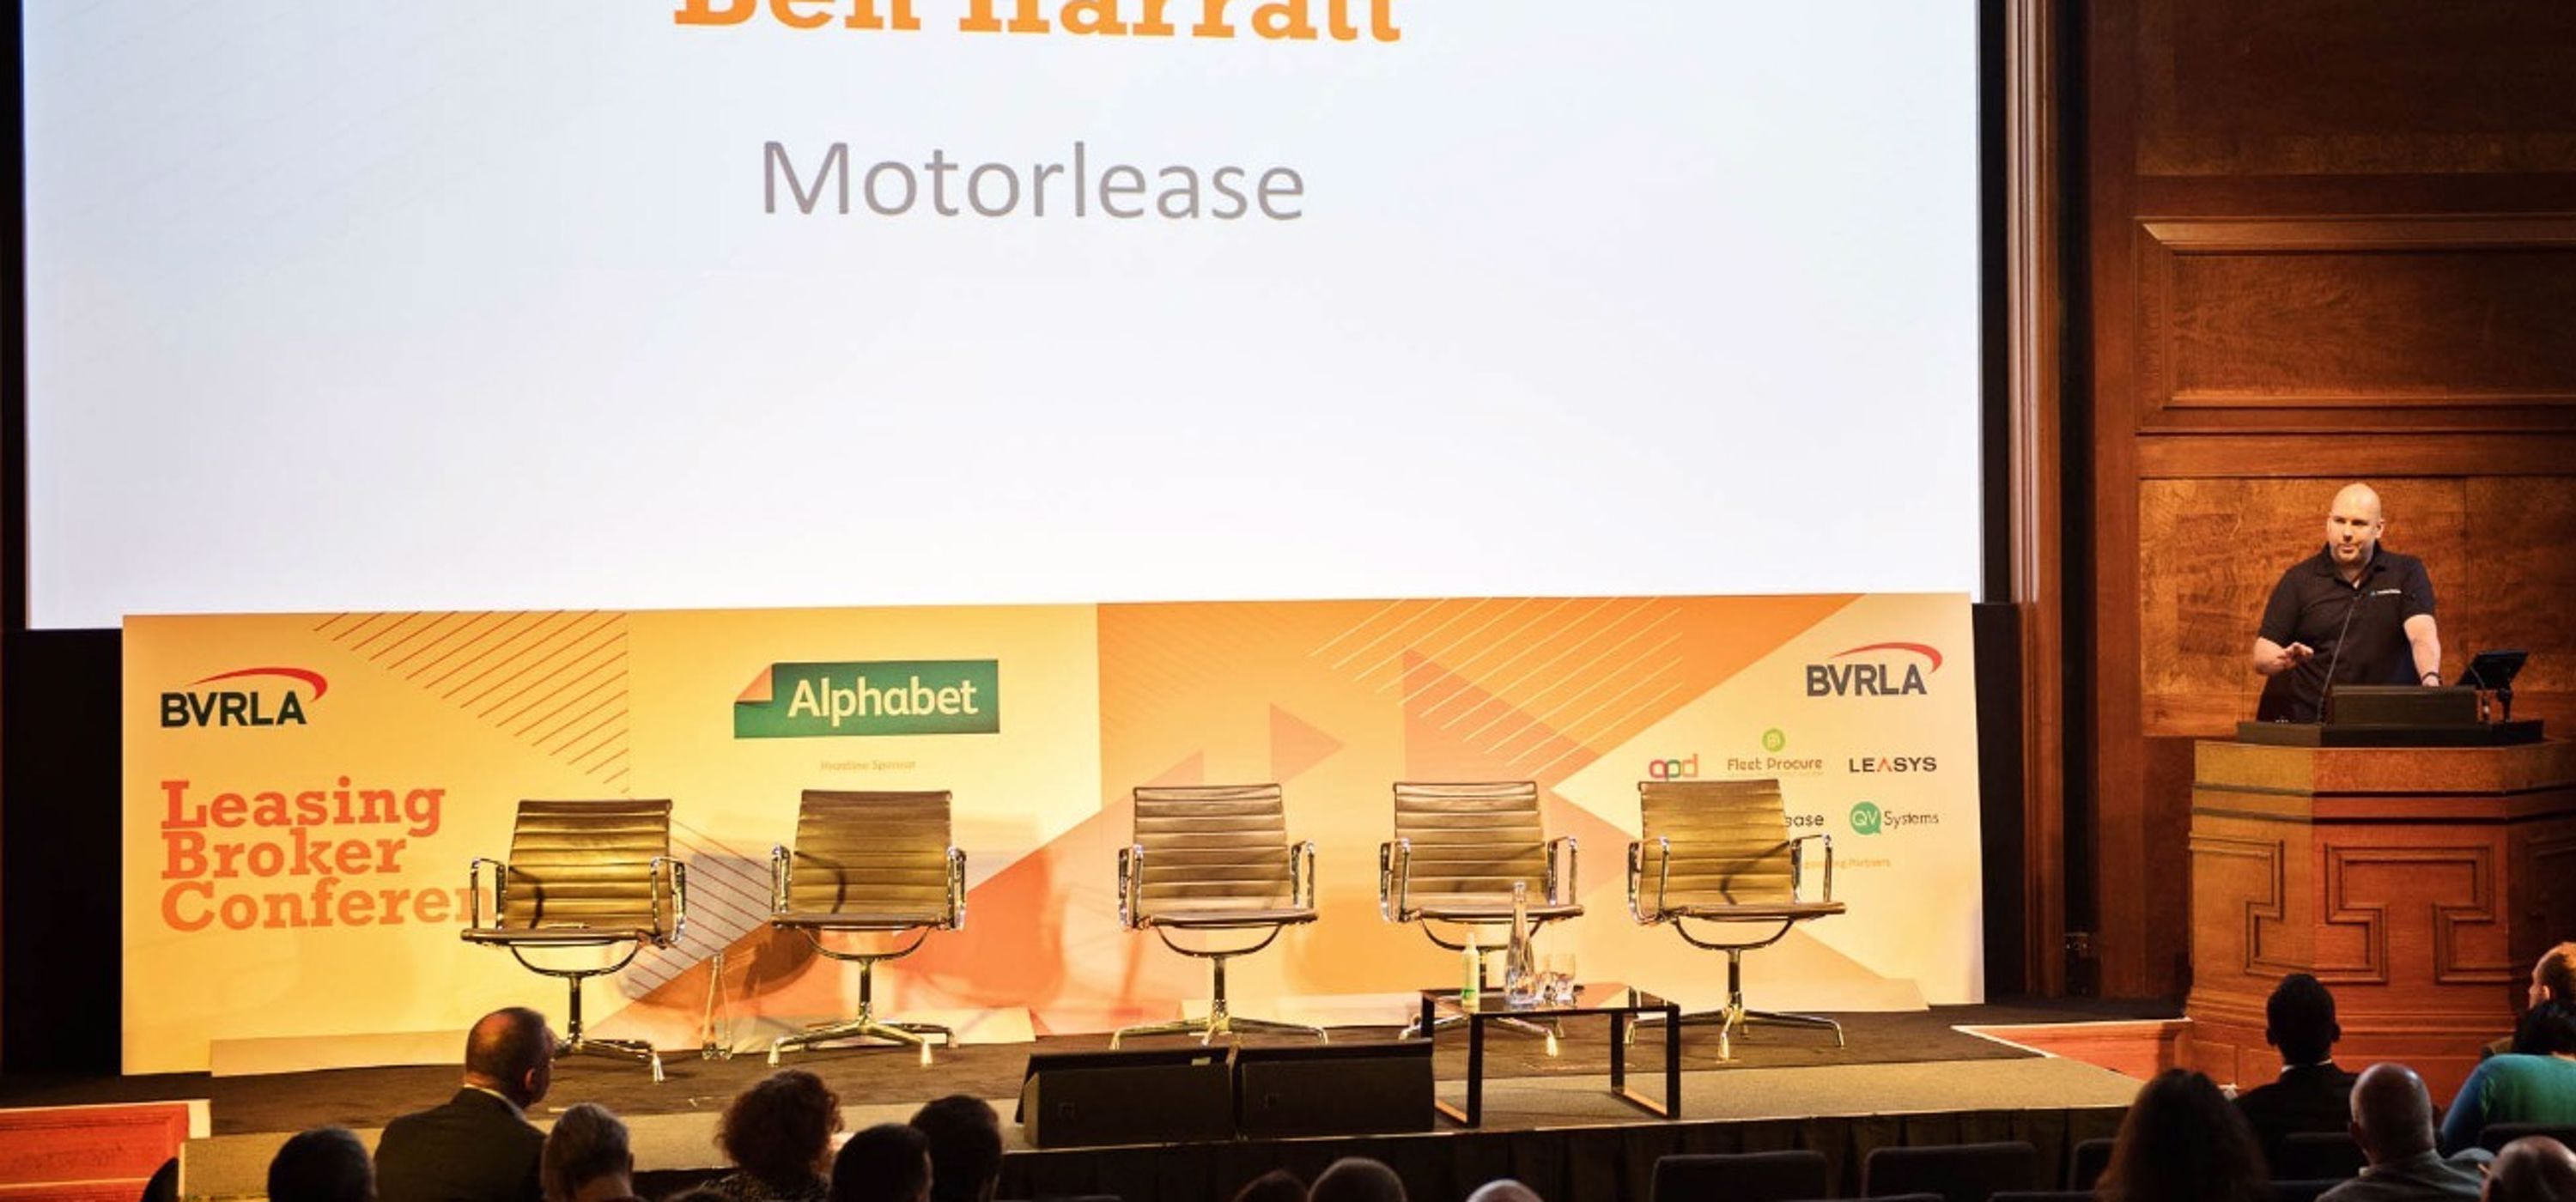 MotorComplete at the BVRLA conference